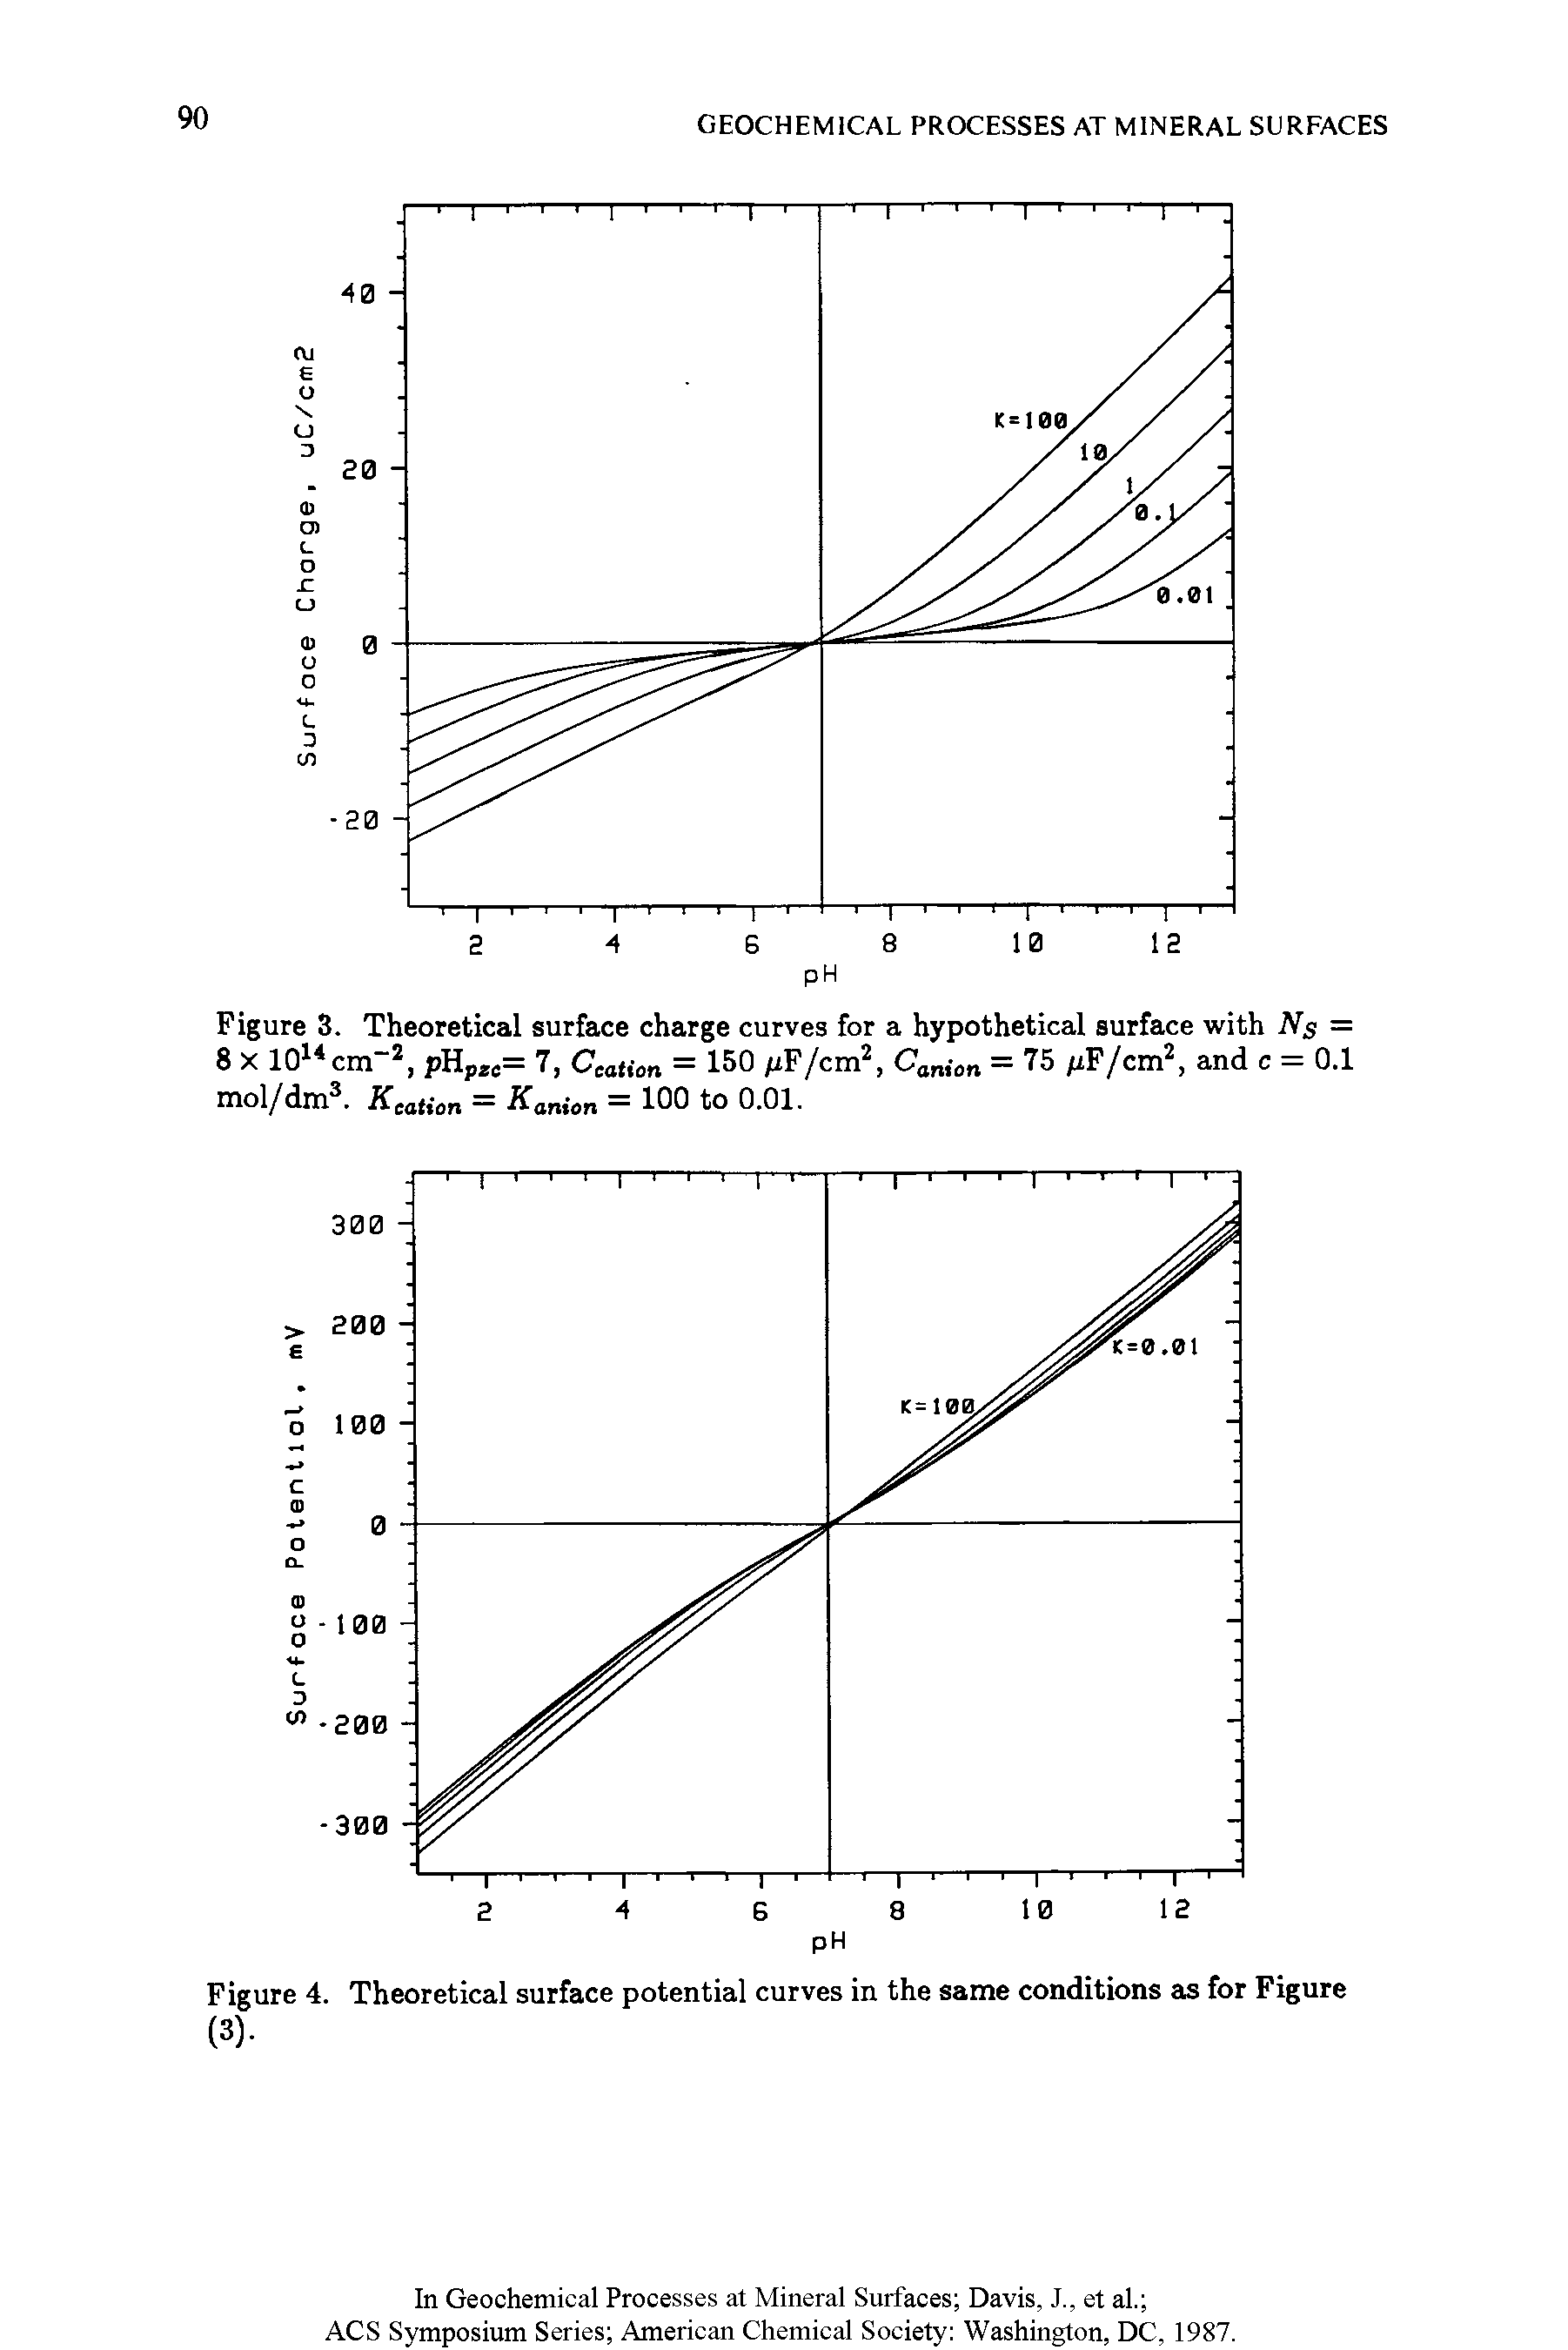 Figure 3. Theoretical surface charge curves for a hypothetical surface with Ns = 8 x 1014cm-2, pHp = 7, Ceaticn = 150 n /cm2, Canion = 75 pF/cm2, and c = 0.1 mol/dm3. Kcane = Kanion = 100 to 0.01.